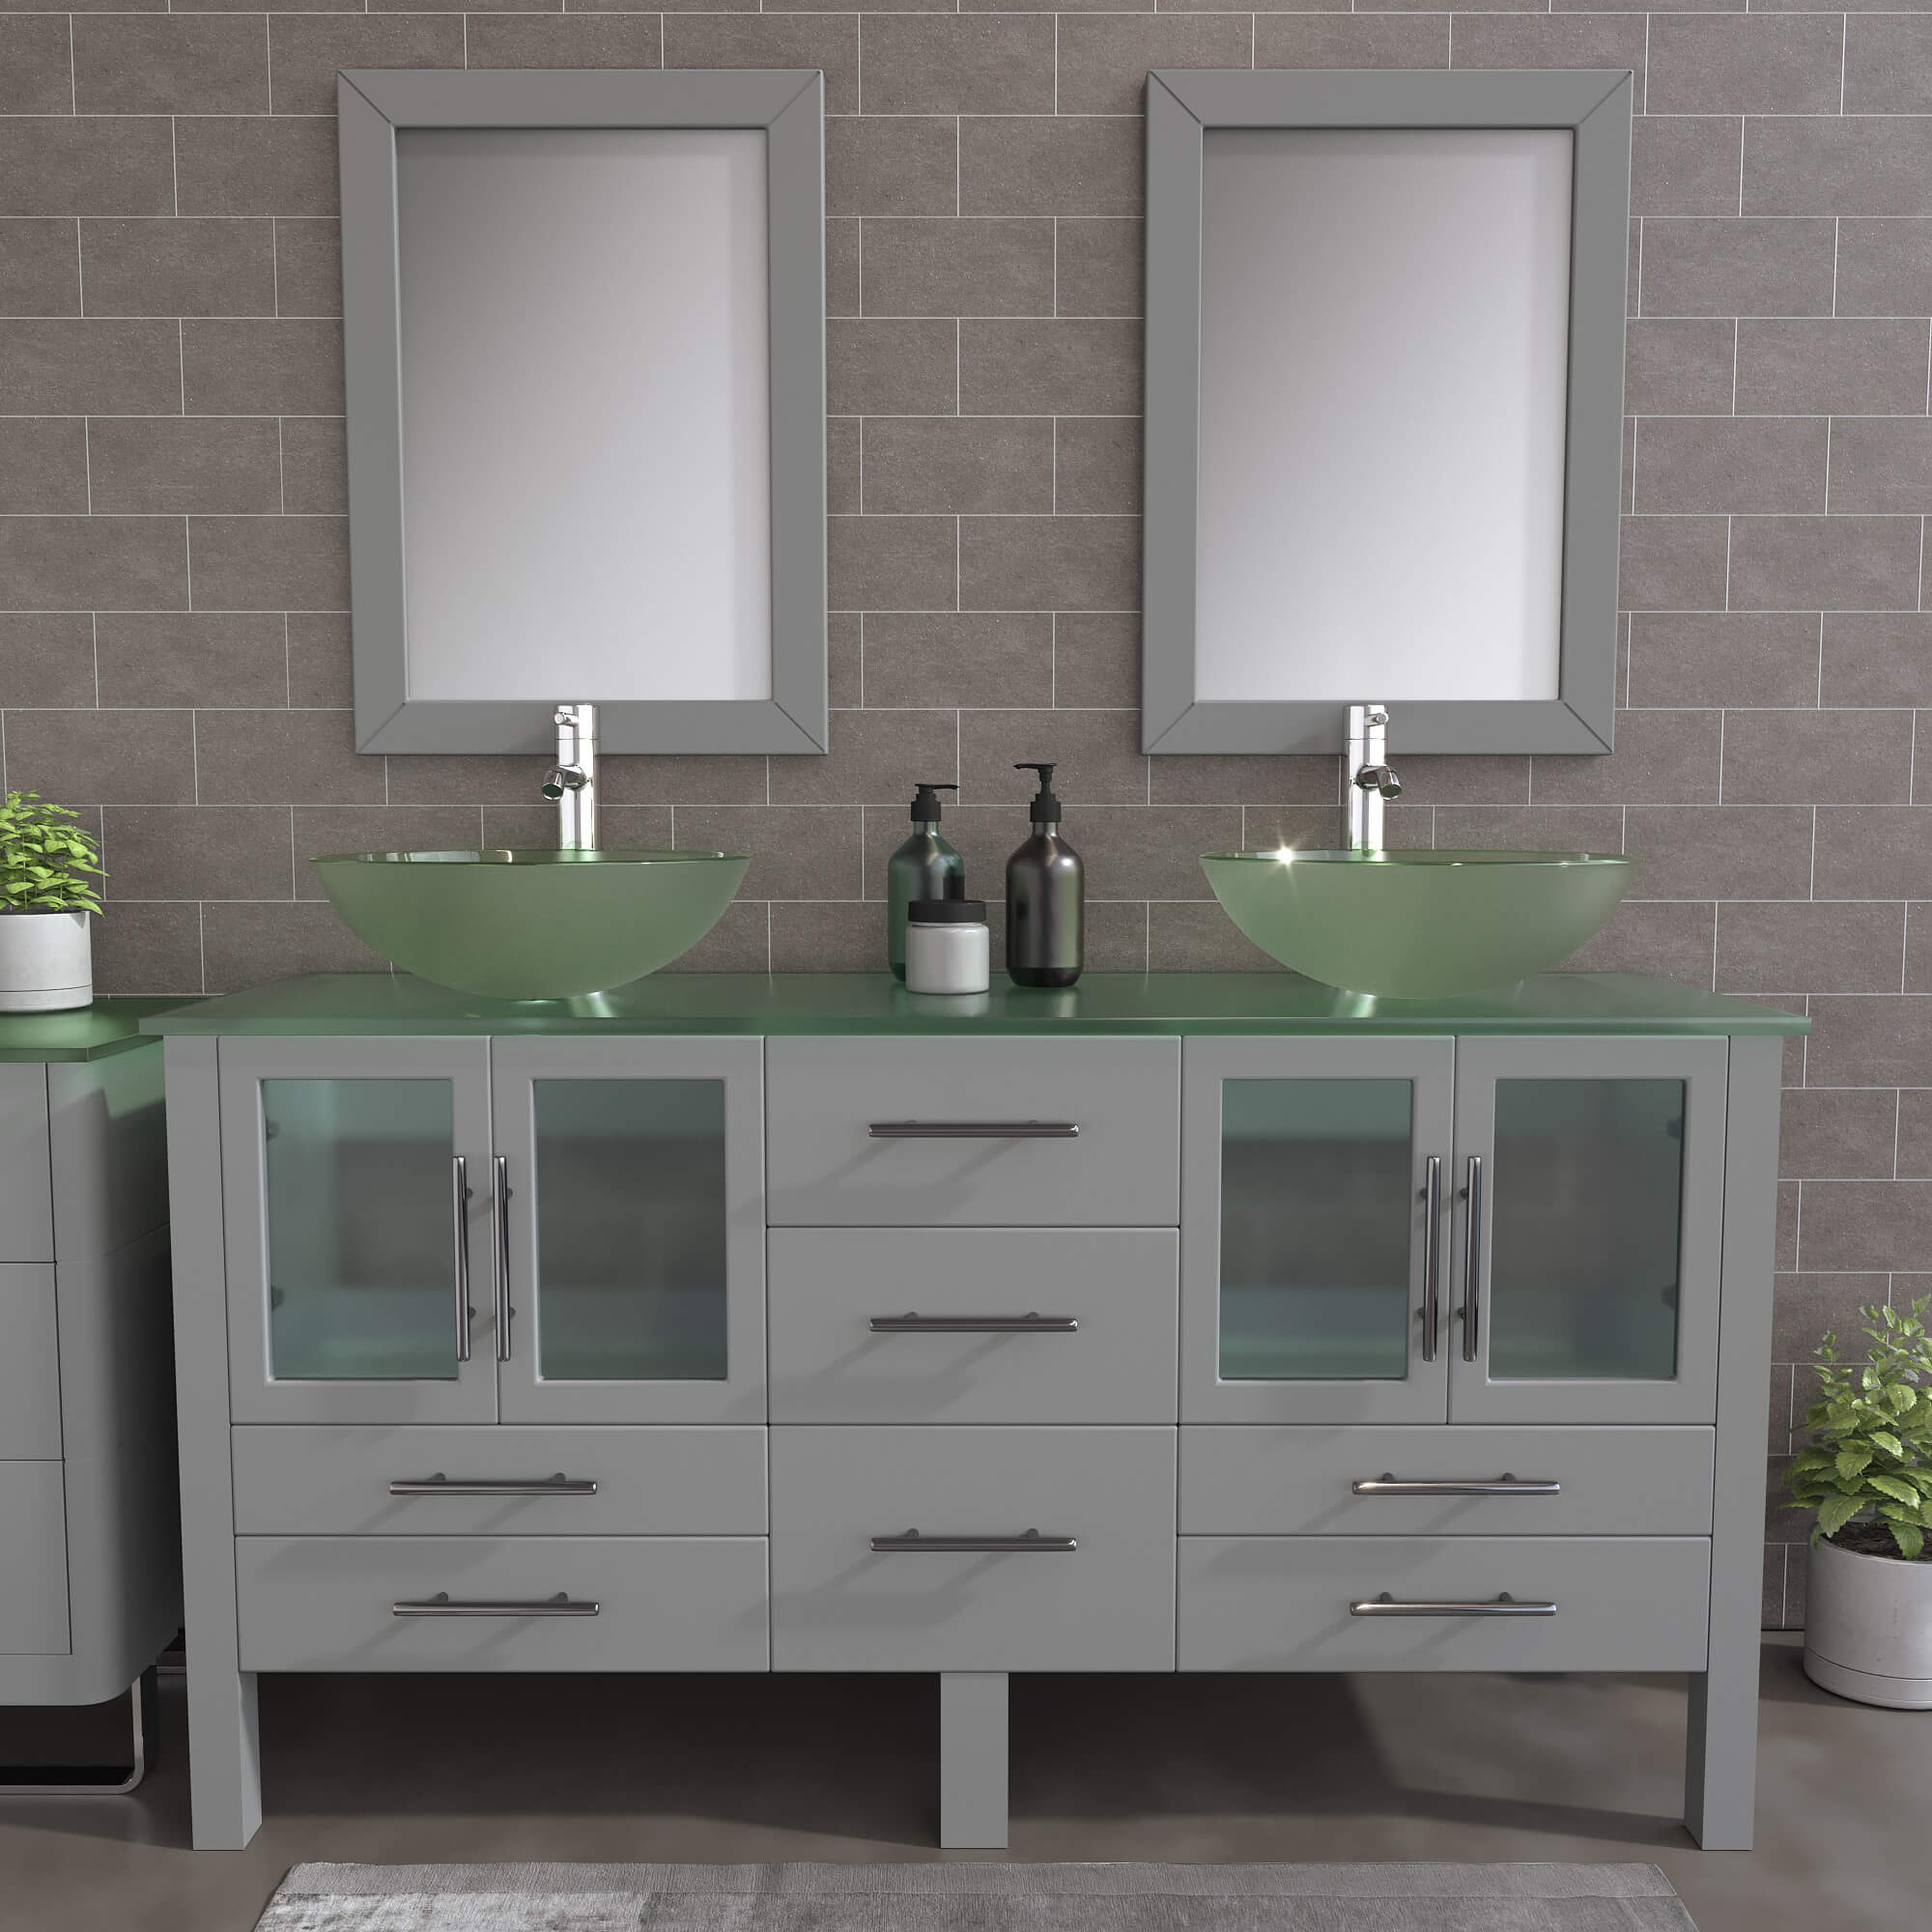 Cambridge Plumbing 8119B-G 63" Double Bathroom Vanity in Gray with Tempered Glass Top and Vessel Sinks, Matching Mirrors, Front View with Chrome Faucets